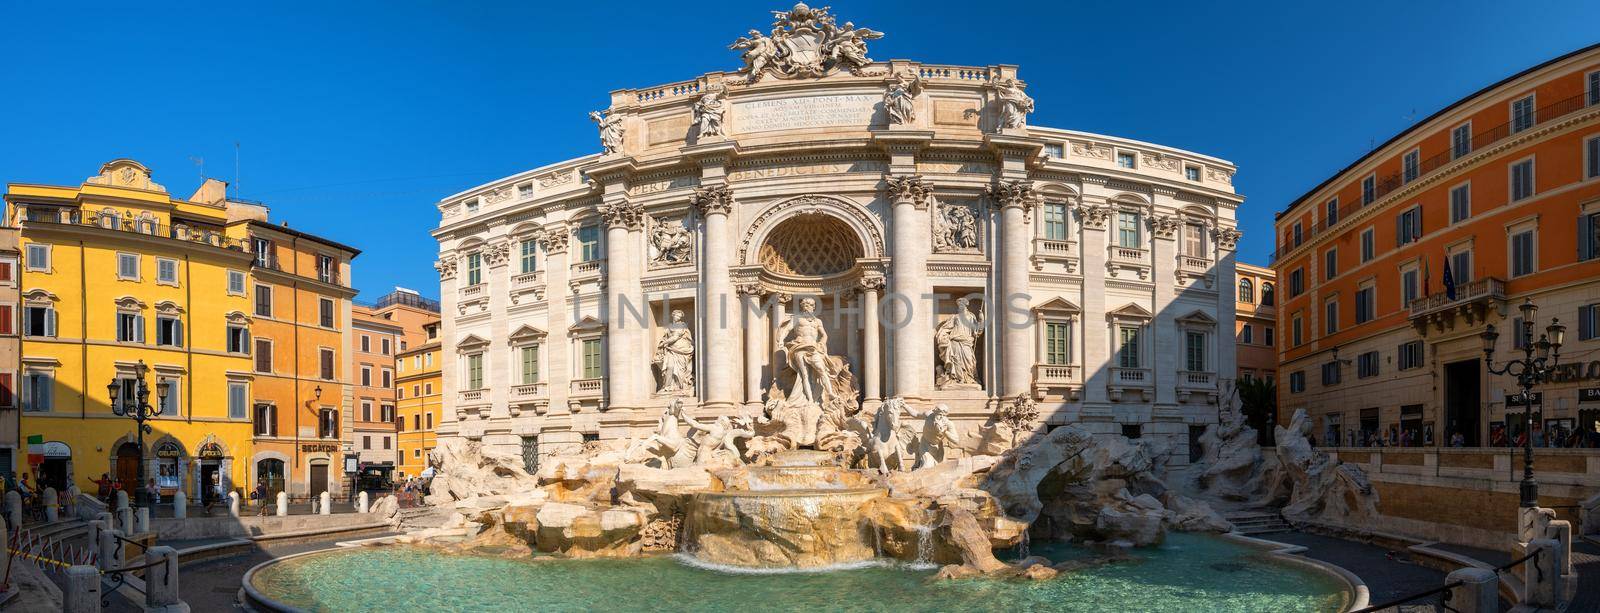 Trevi Fountain, rome, Italy. City trip Rome in the morning